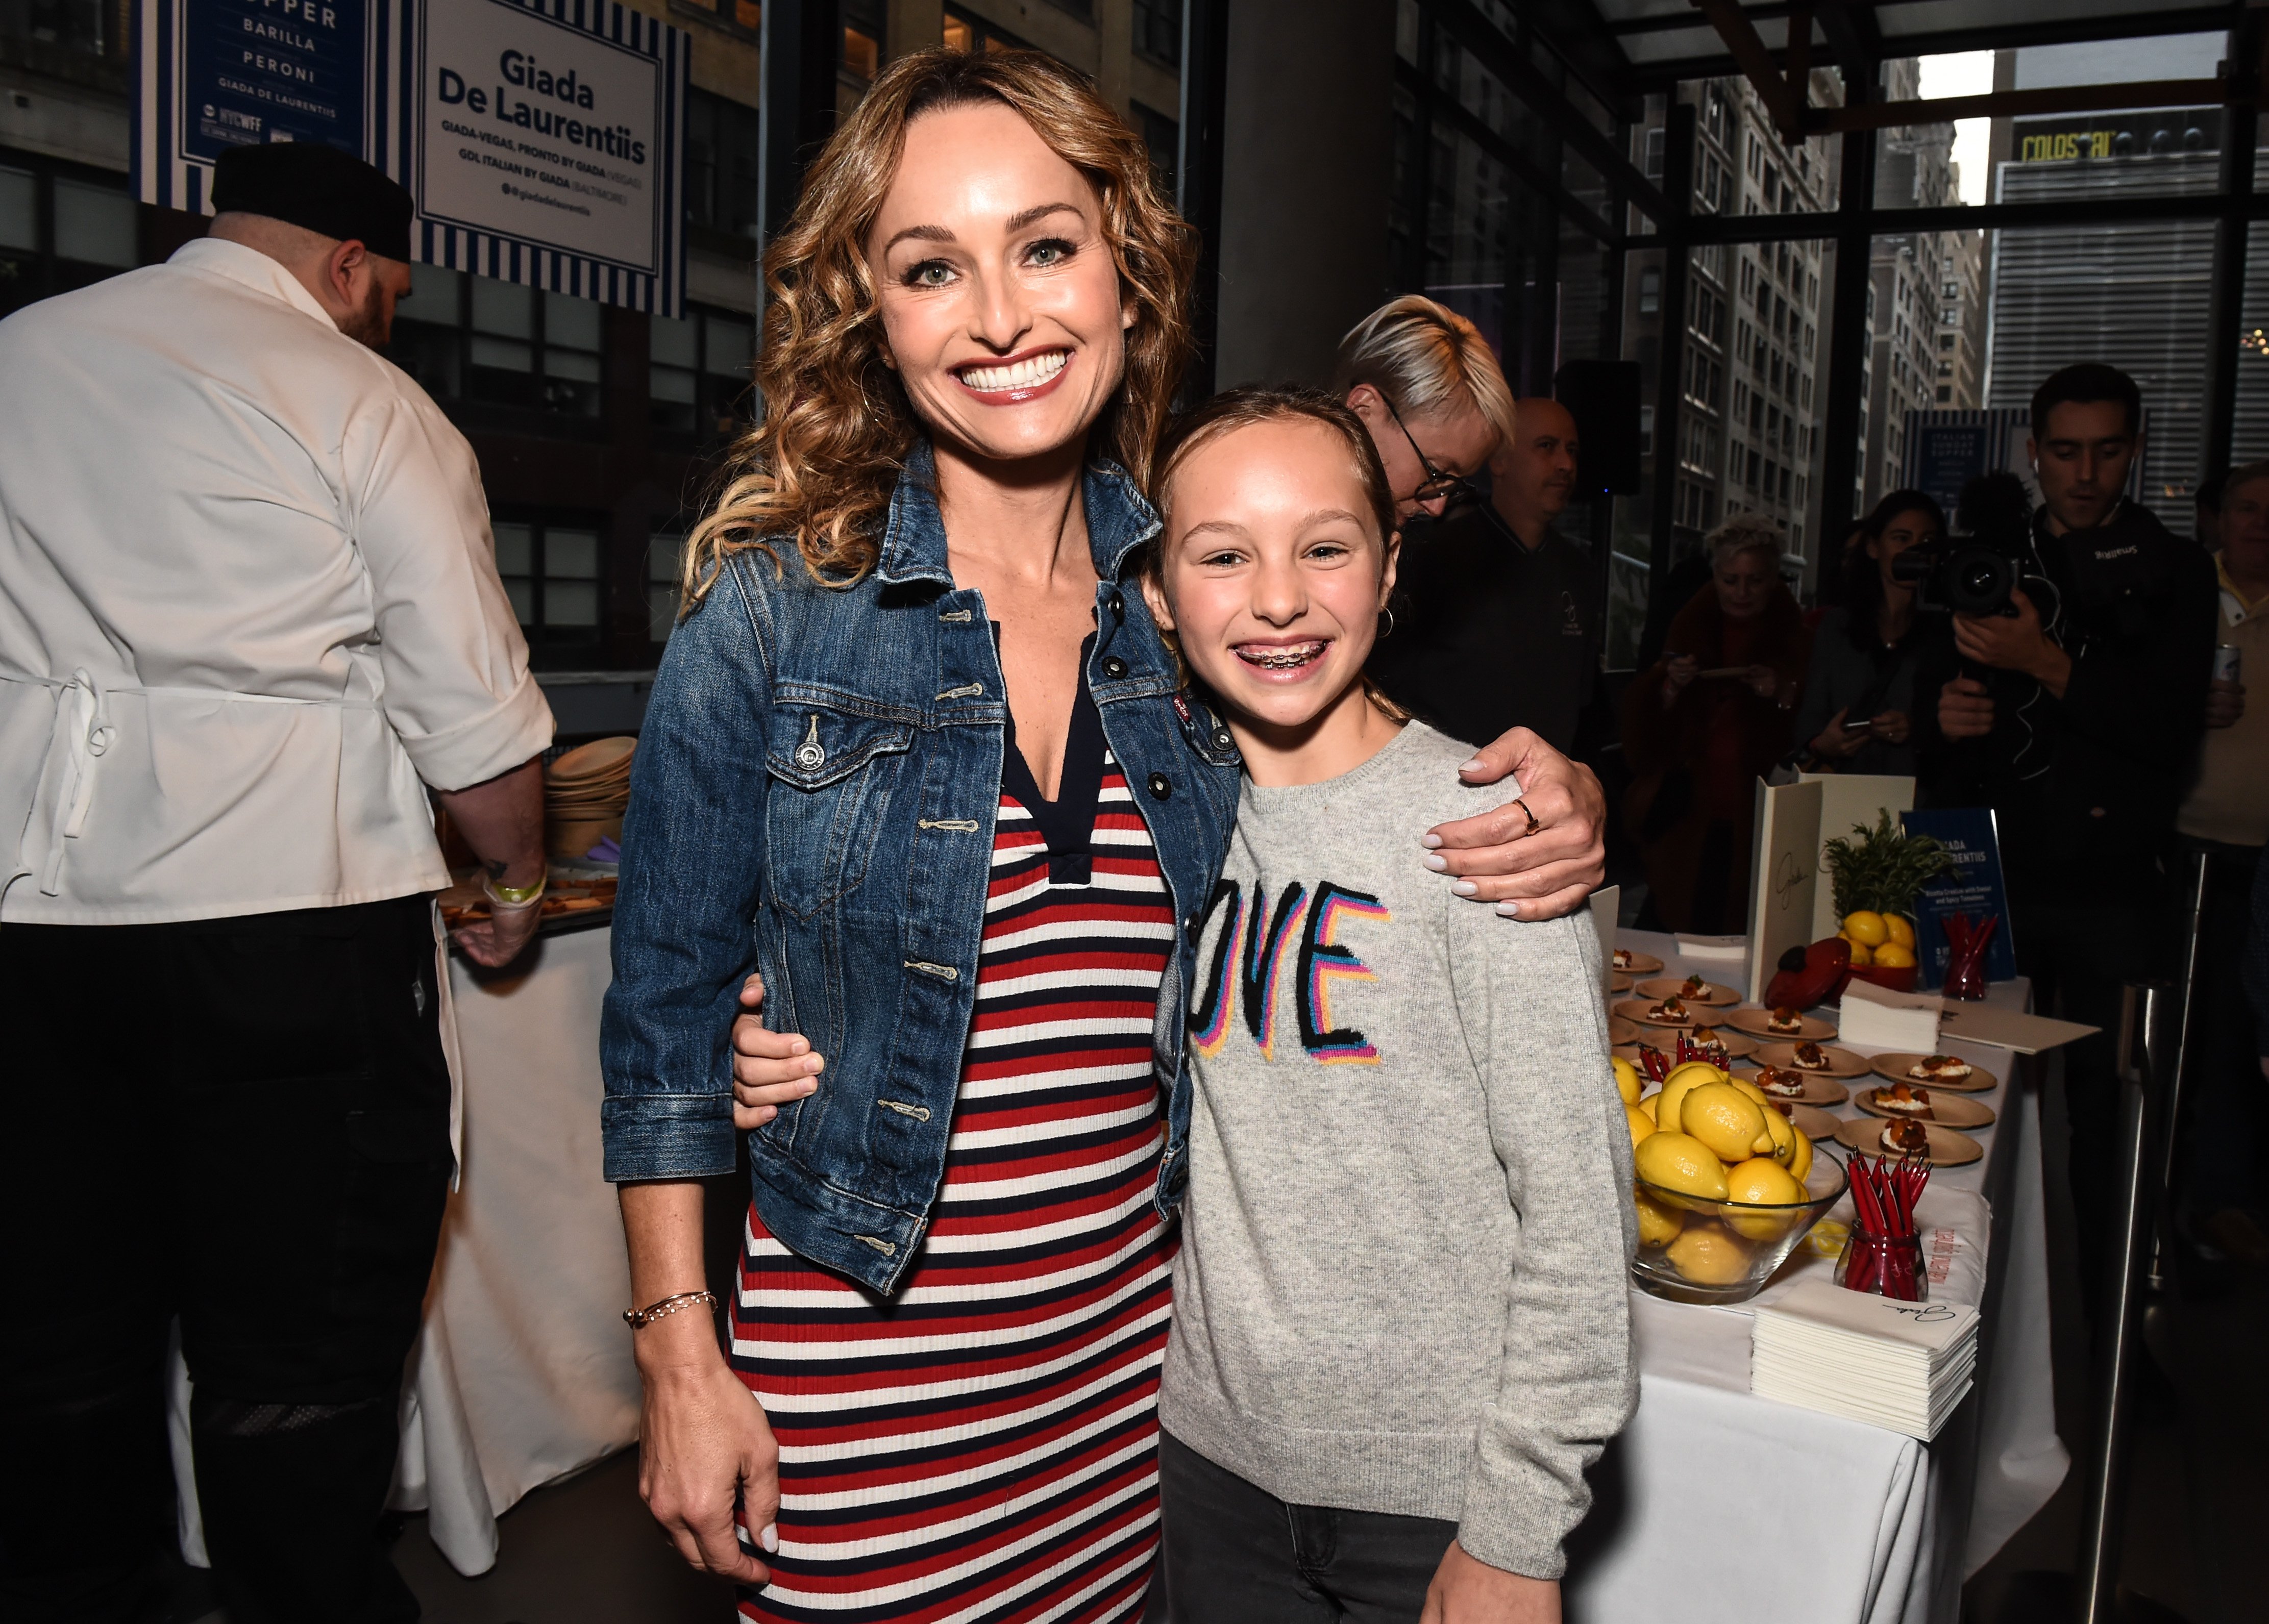 Celebrity chef Giada De Laurentiis and her daughter Jade pose for a photo in 2019